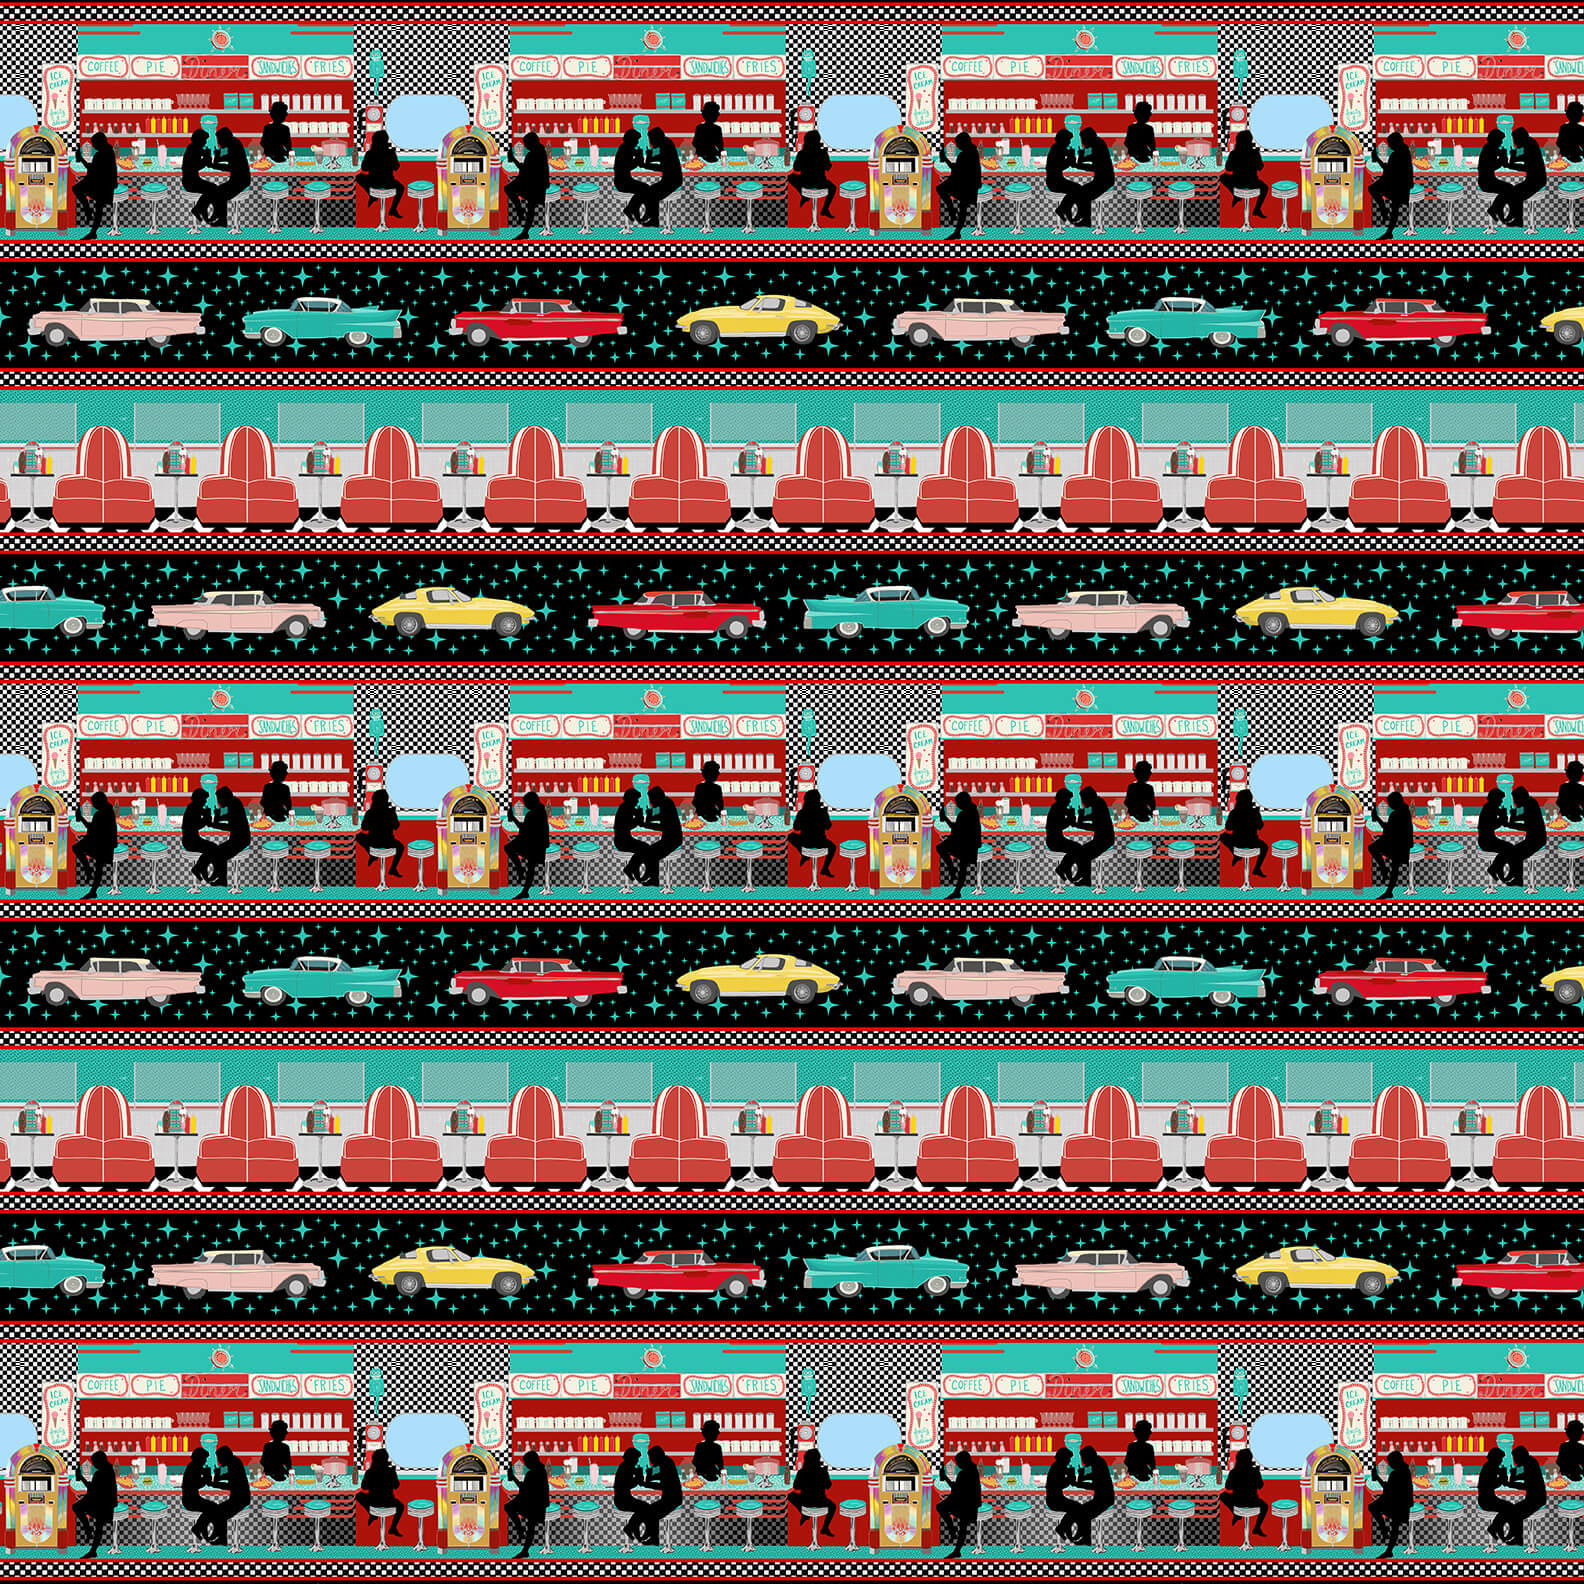 DINERS & DRIVE-INS Border Stripe turquoise